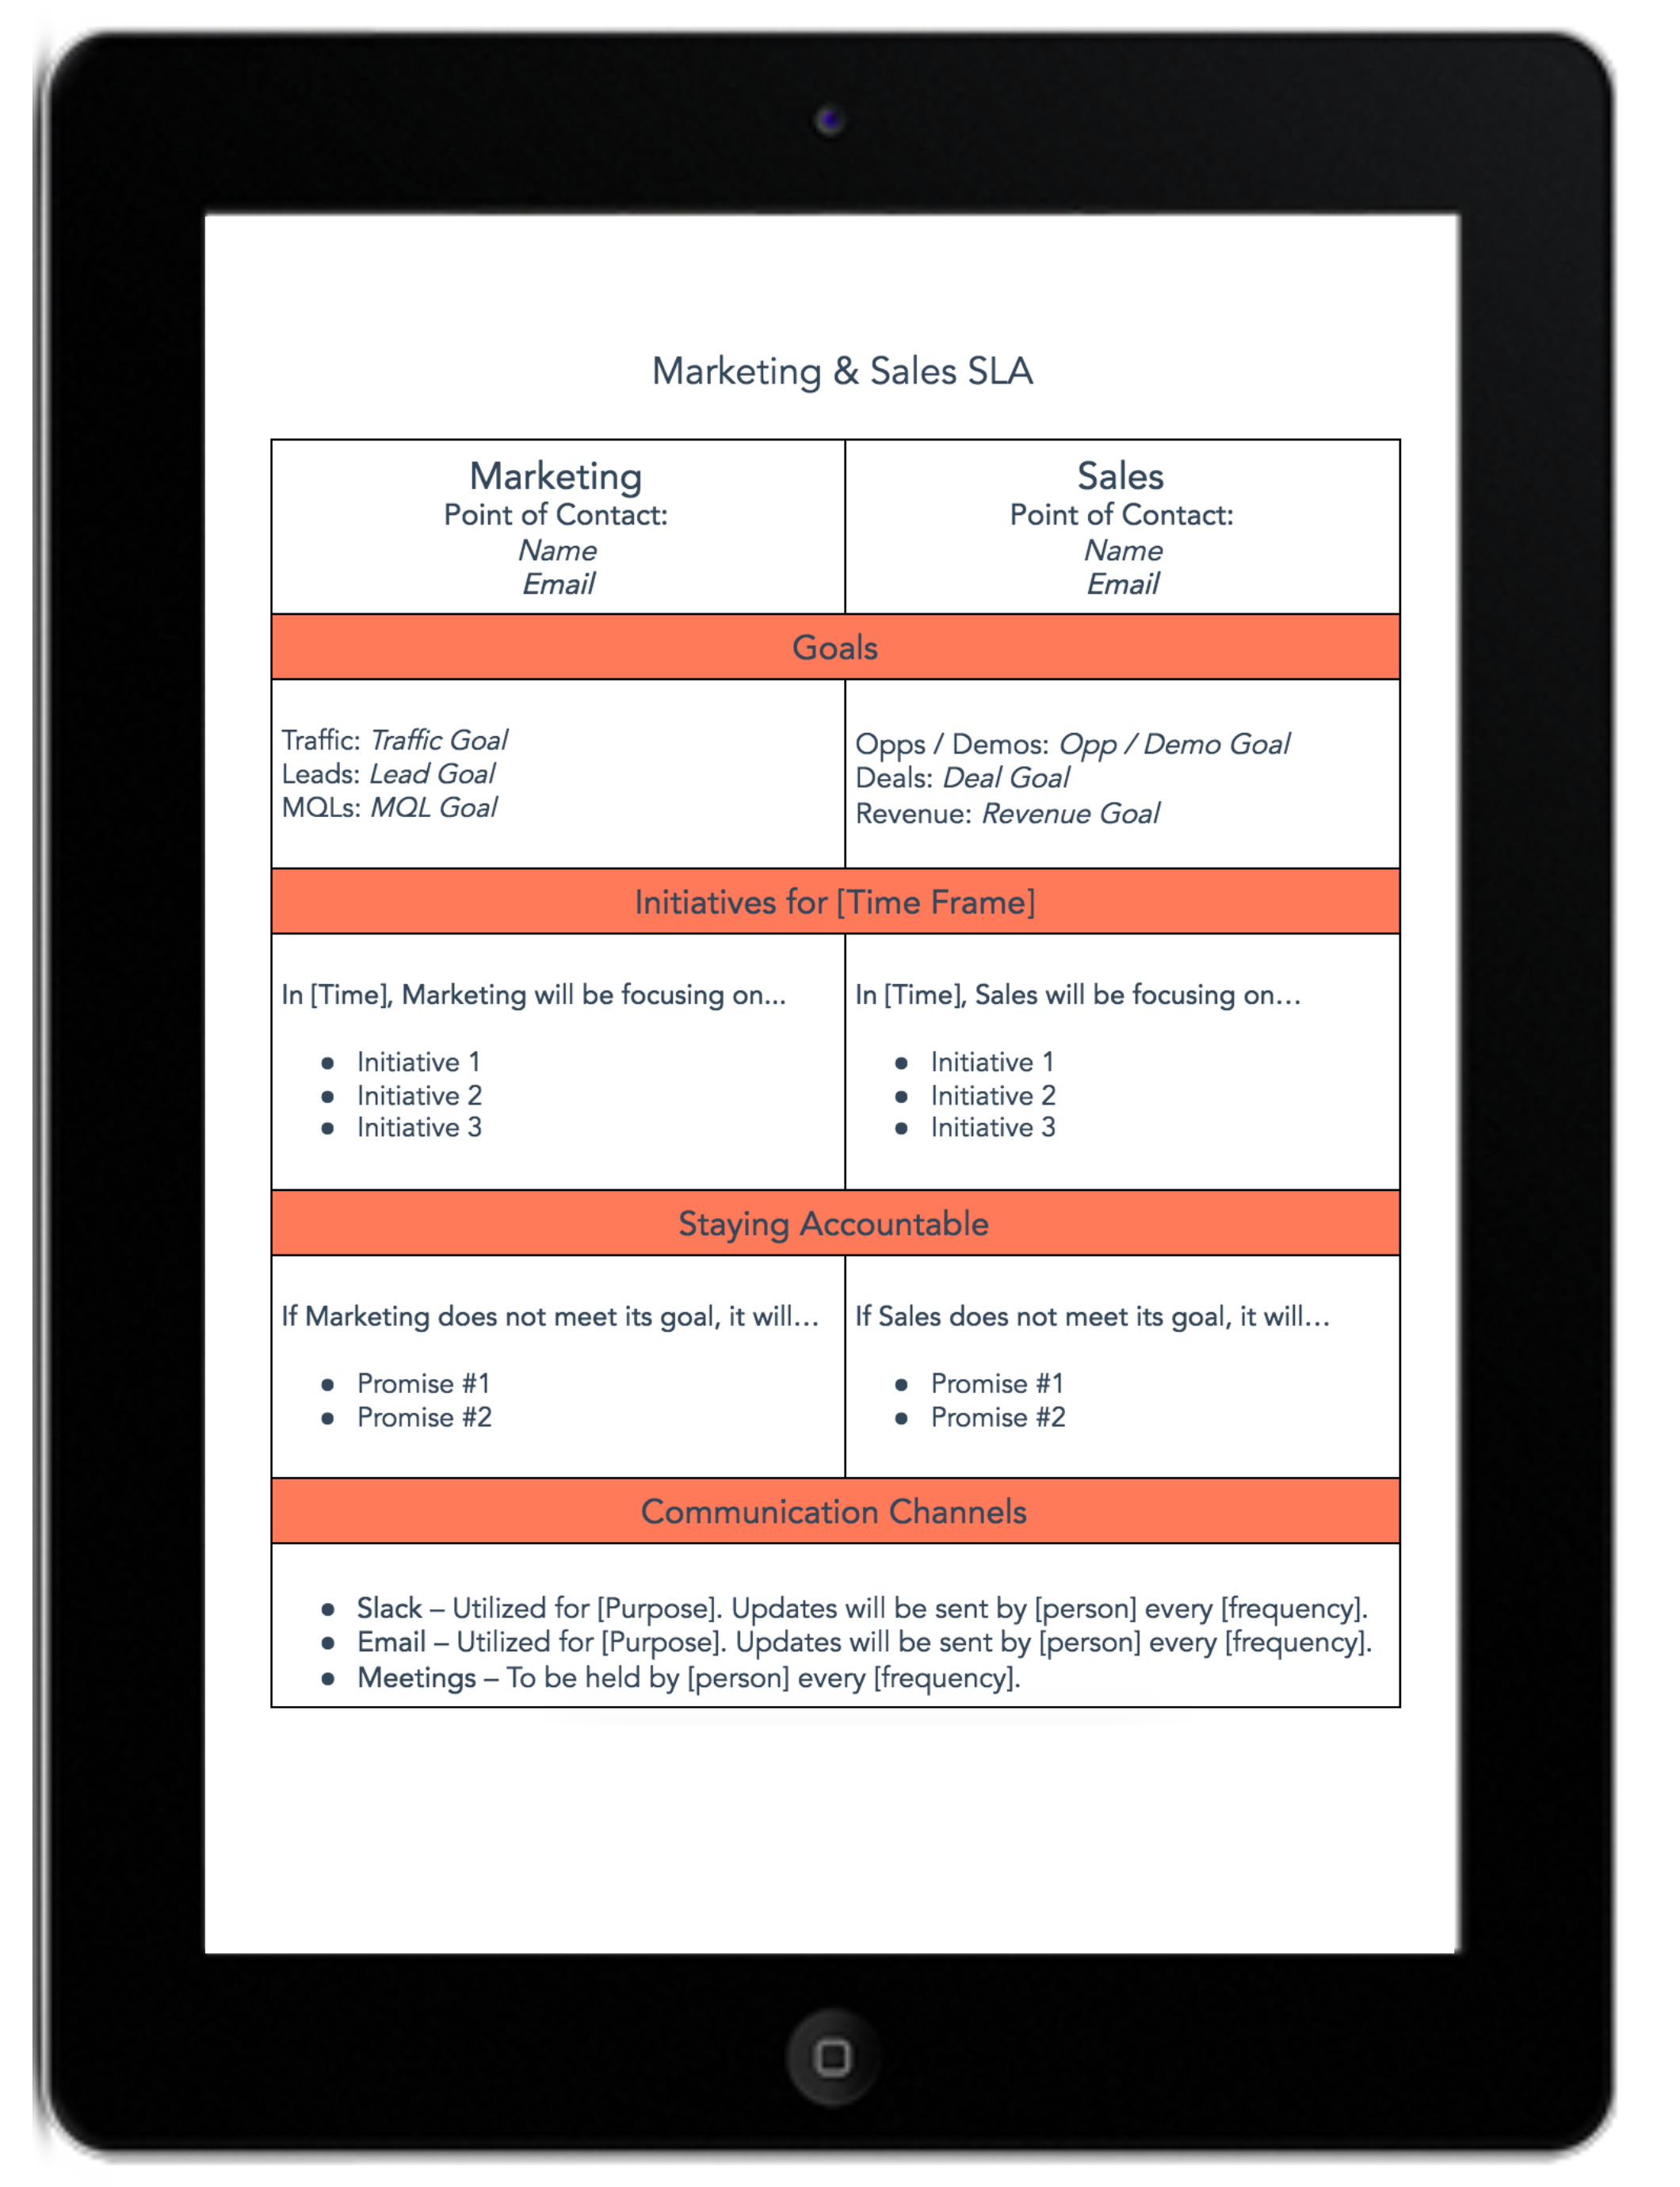 Free SLA Template for Marketing & Sales Download Now